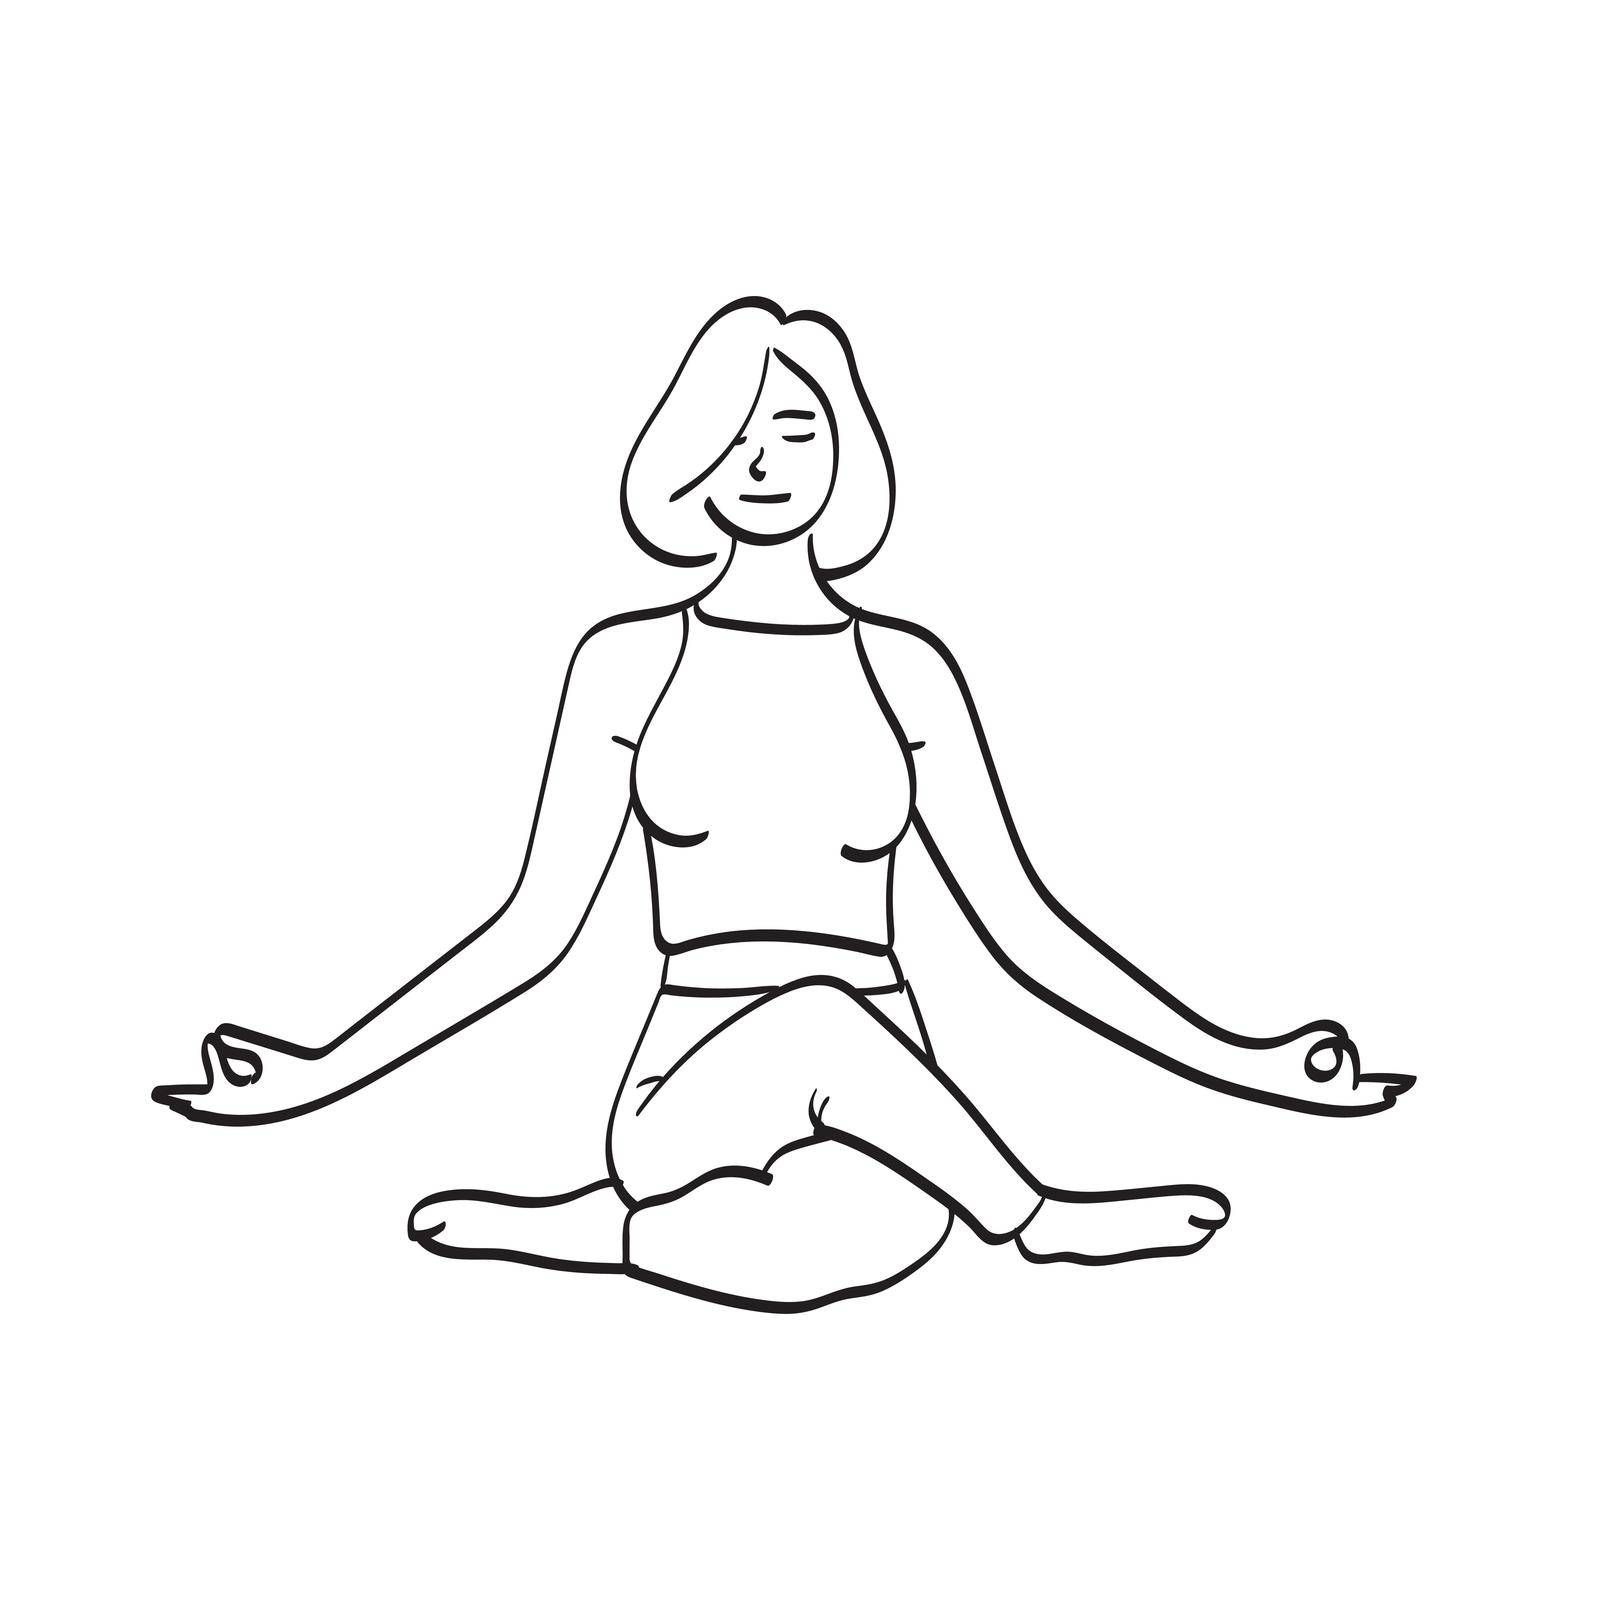 woman practices yoga and meditates in the lotus position illustration vector hand drawn isolated on white background line art. by tidarattj